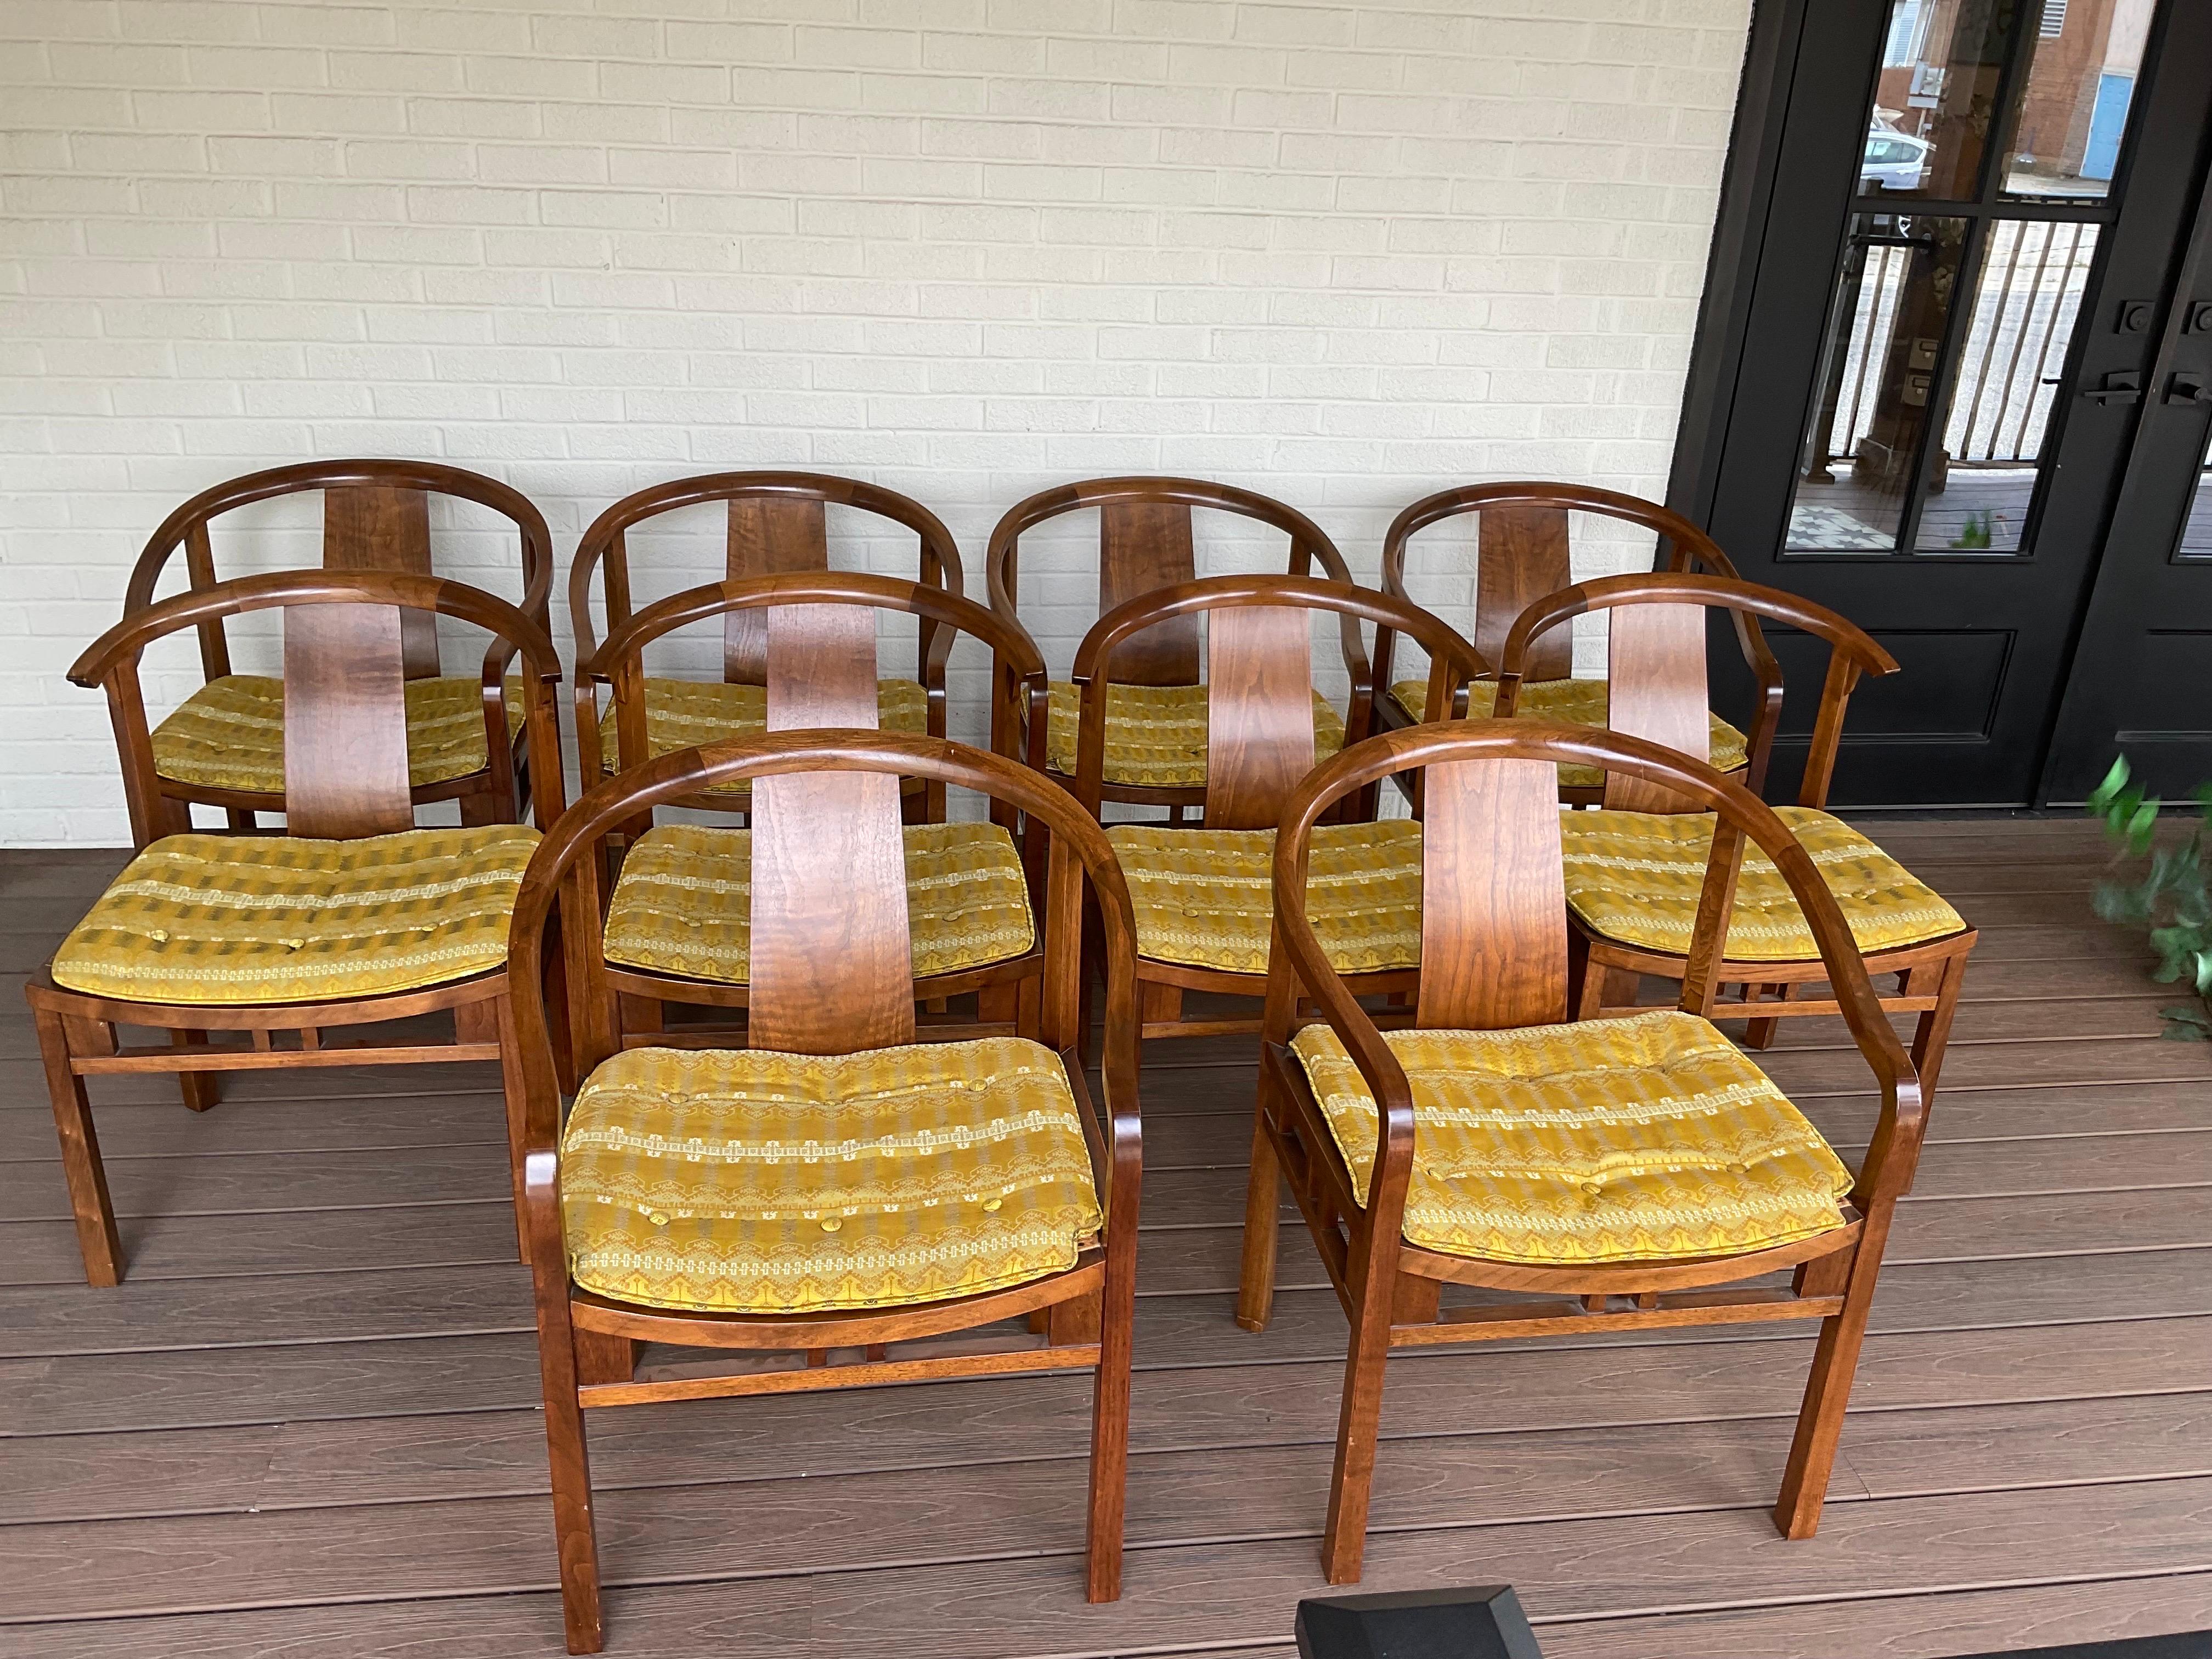 Arguably one of the finest examples in existence boasting the original finish and spectacular upholstered seat pads over cane seats. These are Rare and extraordinary in their presence and condition. 4 side chairs and 6 arm chairs alternate around